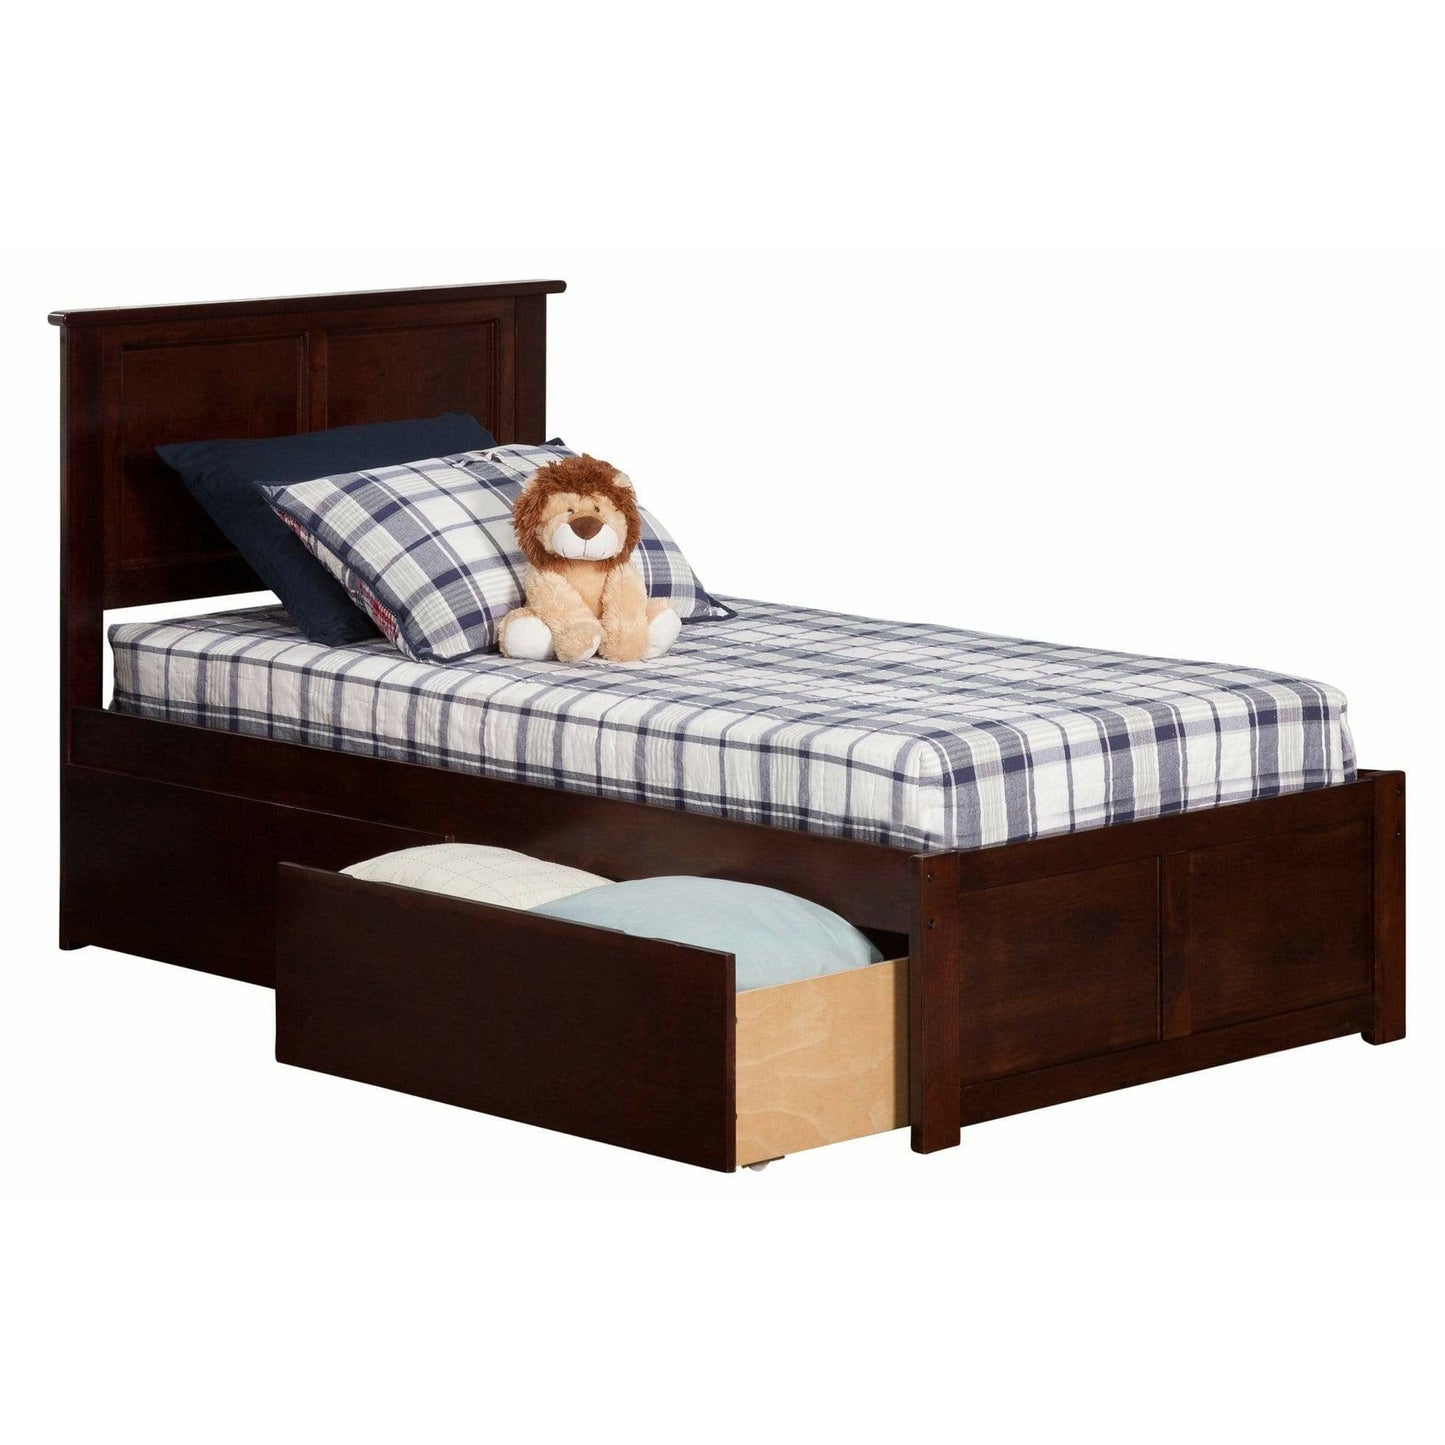 Atlantic Furniture Bed Walnut Madison Twin XL Platform Bed with Flat Panel Foot Board and 2 Urban Bed Drawers in Espresso